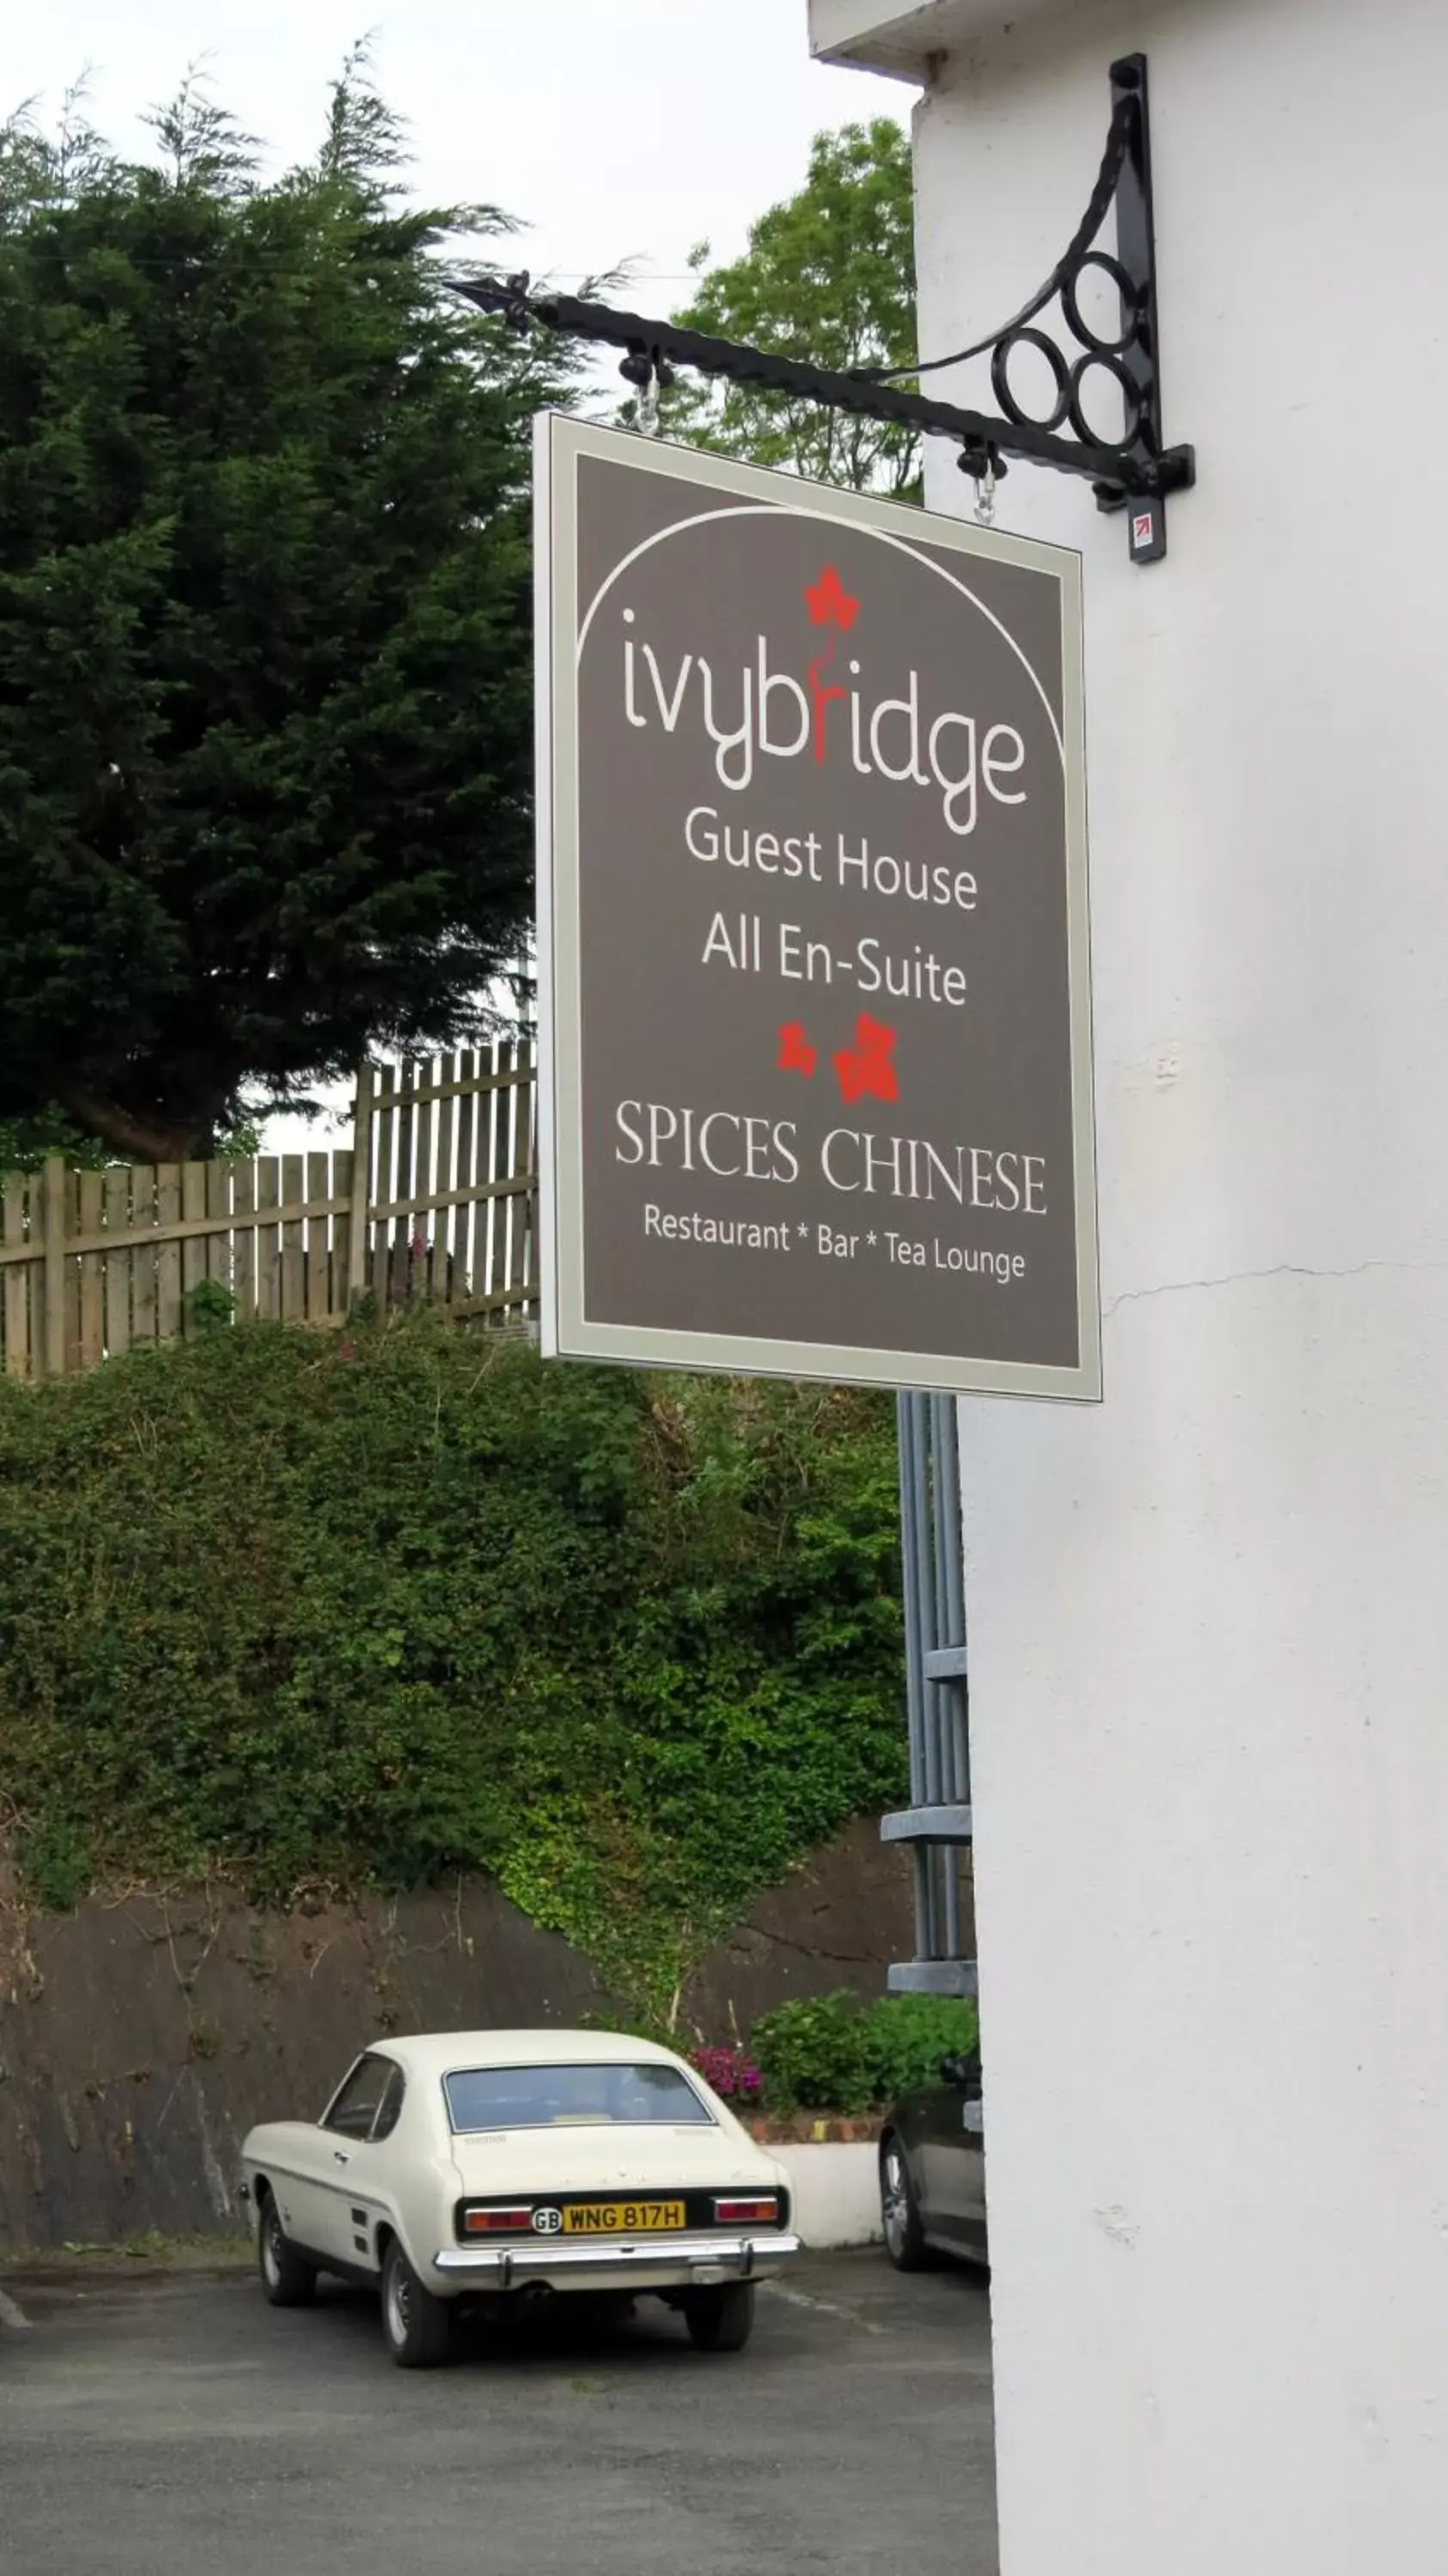 Property logo or sign, Property Logo/Sign in Ivybridge Guesthouse